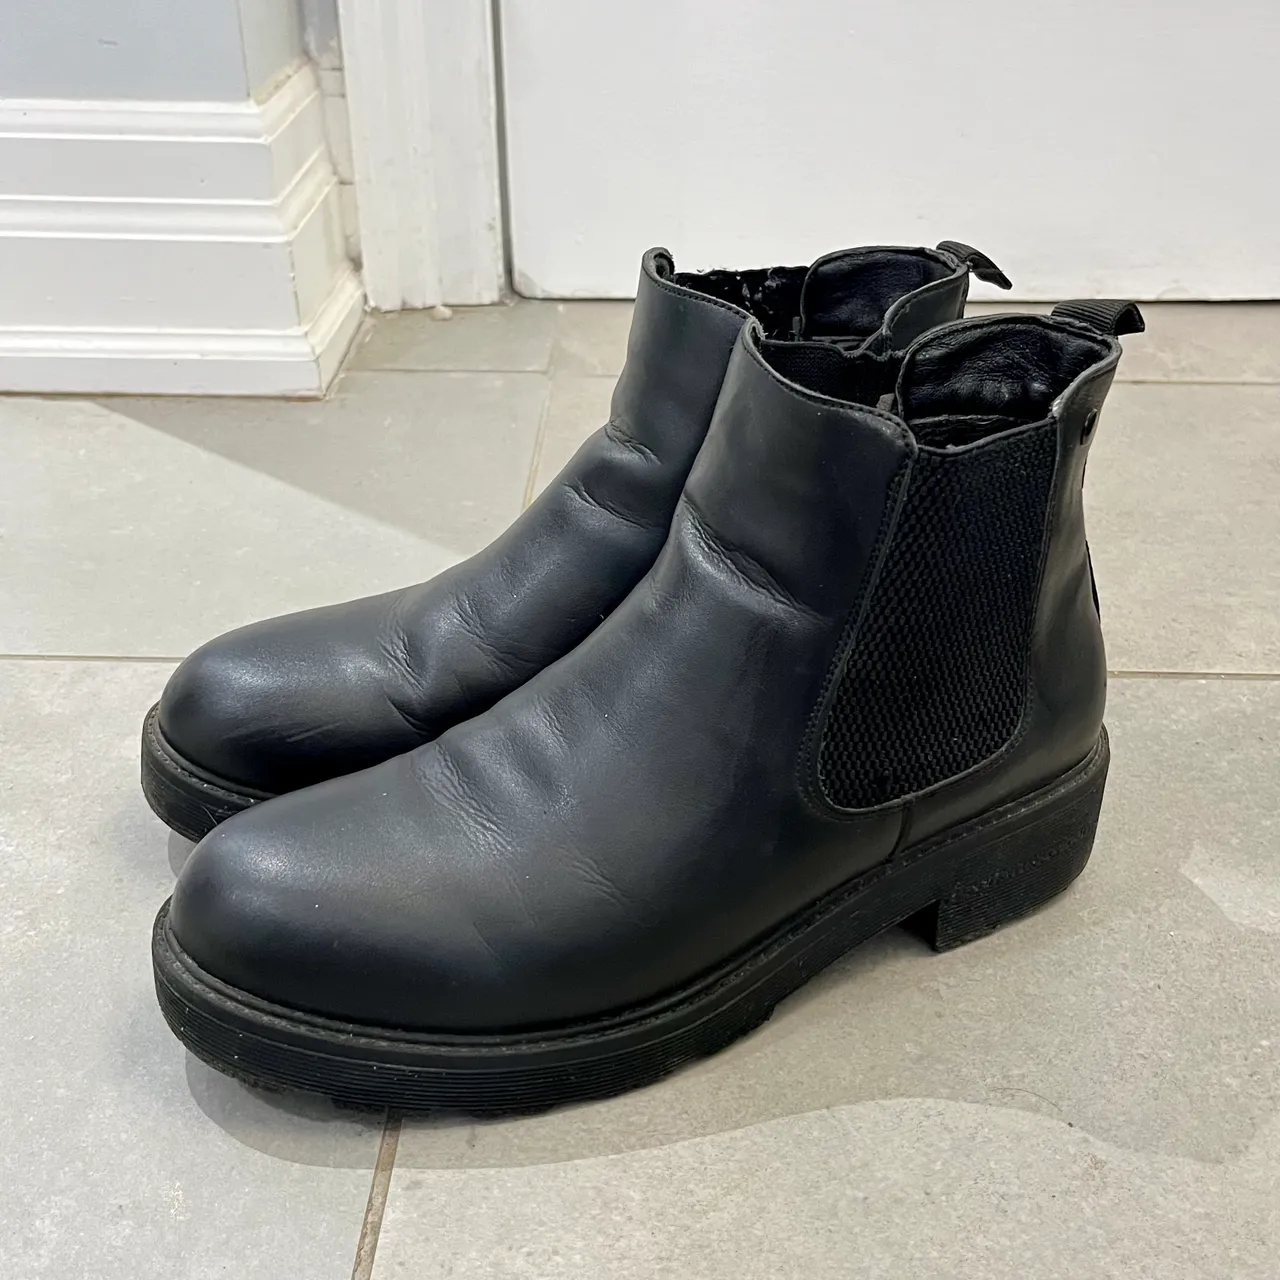 Chelsea style boots photo 3